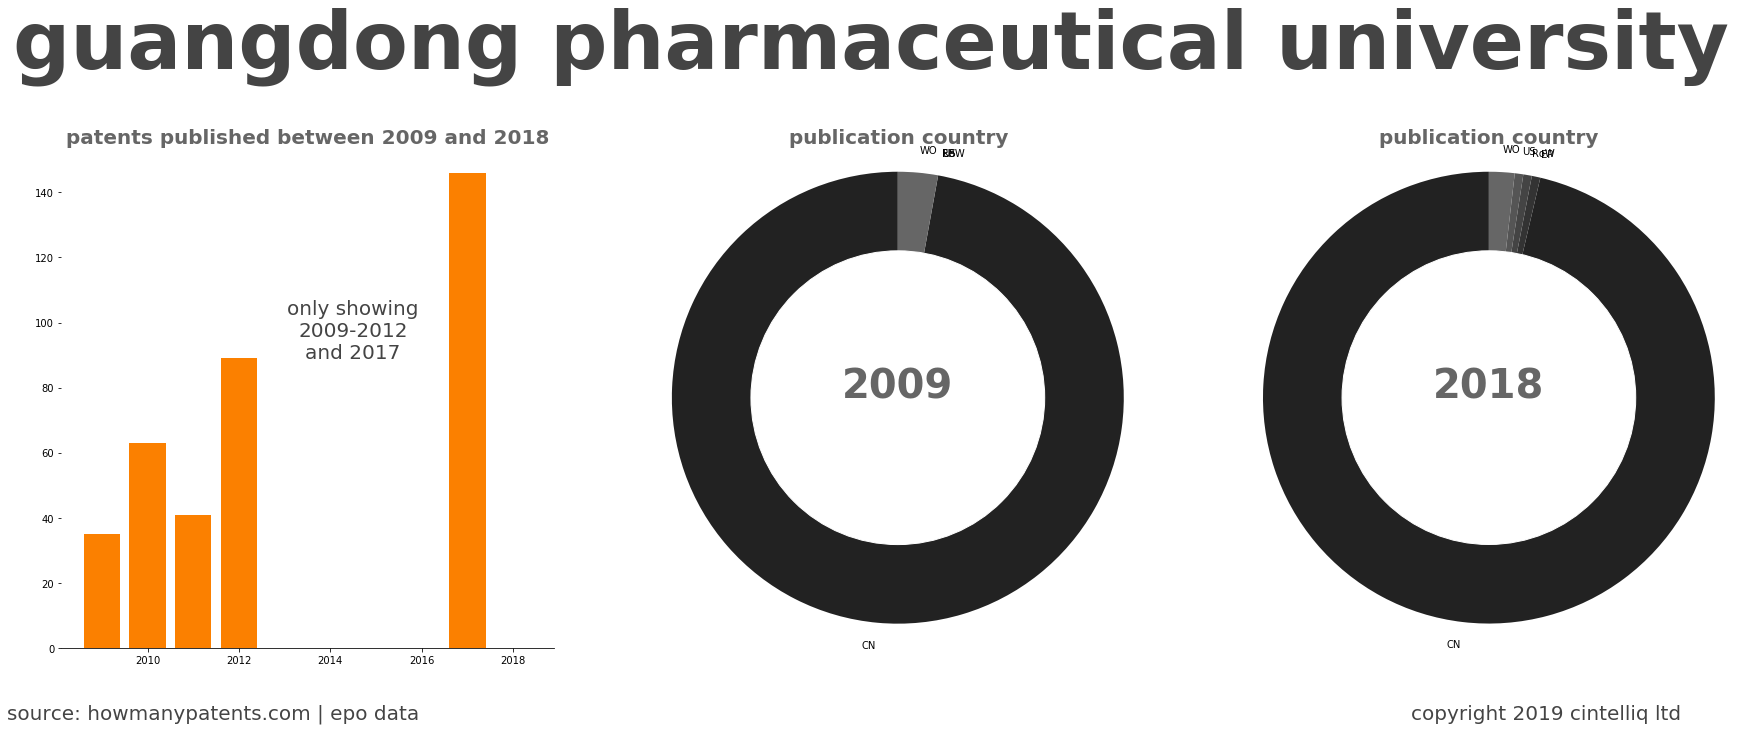 summary of patents for Guangdong Pharmaceutical University